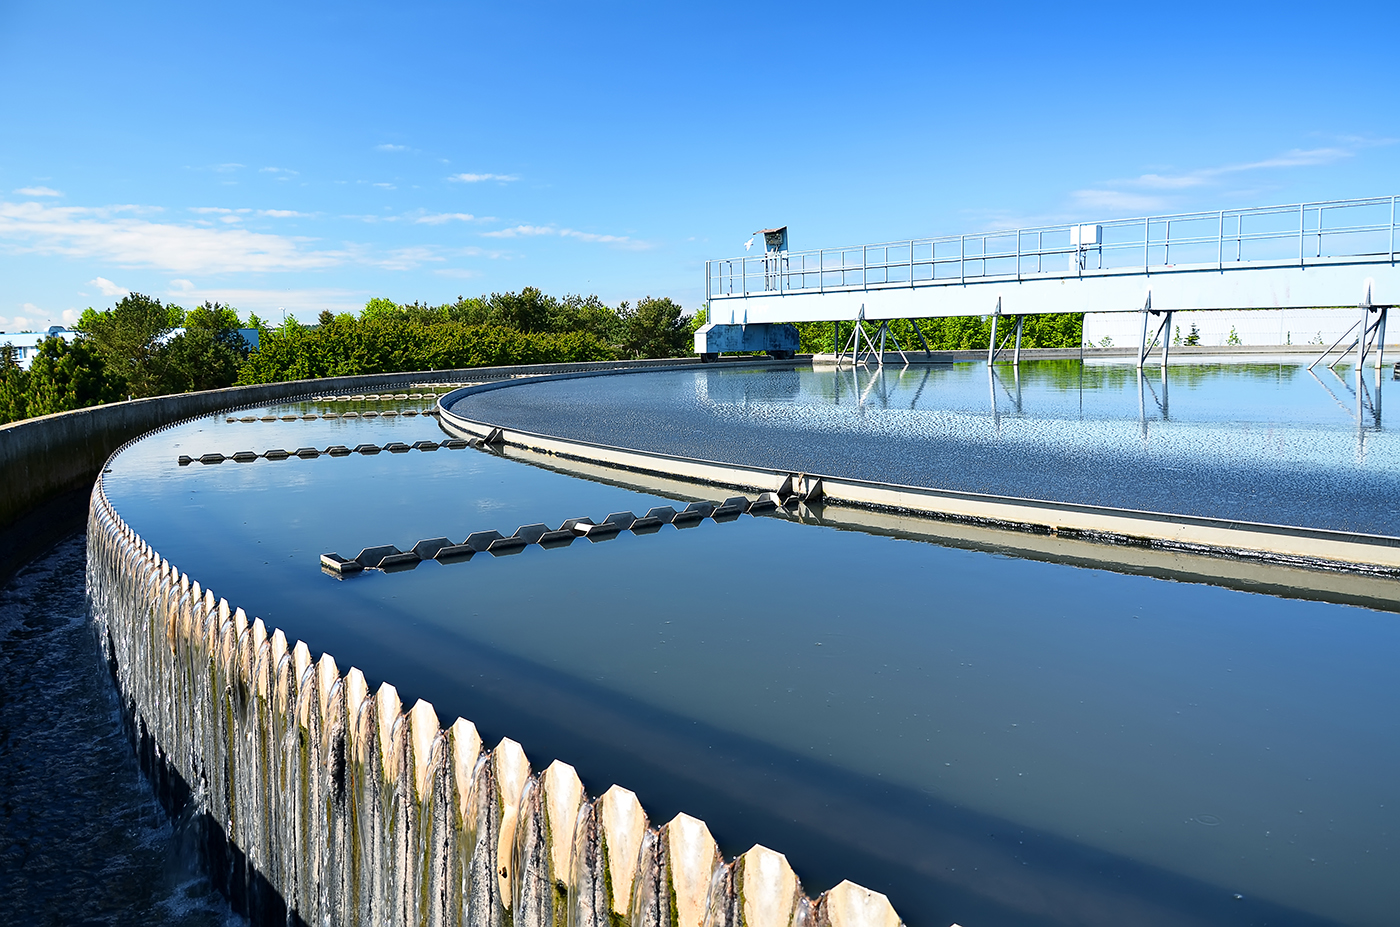 Wastewater treatment systems are vital to protecting public health, but leaky pipes and other problems can release pollutants into groundwater, lakes and streams.